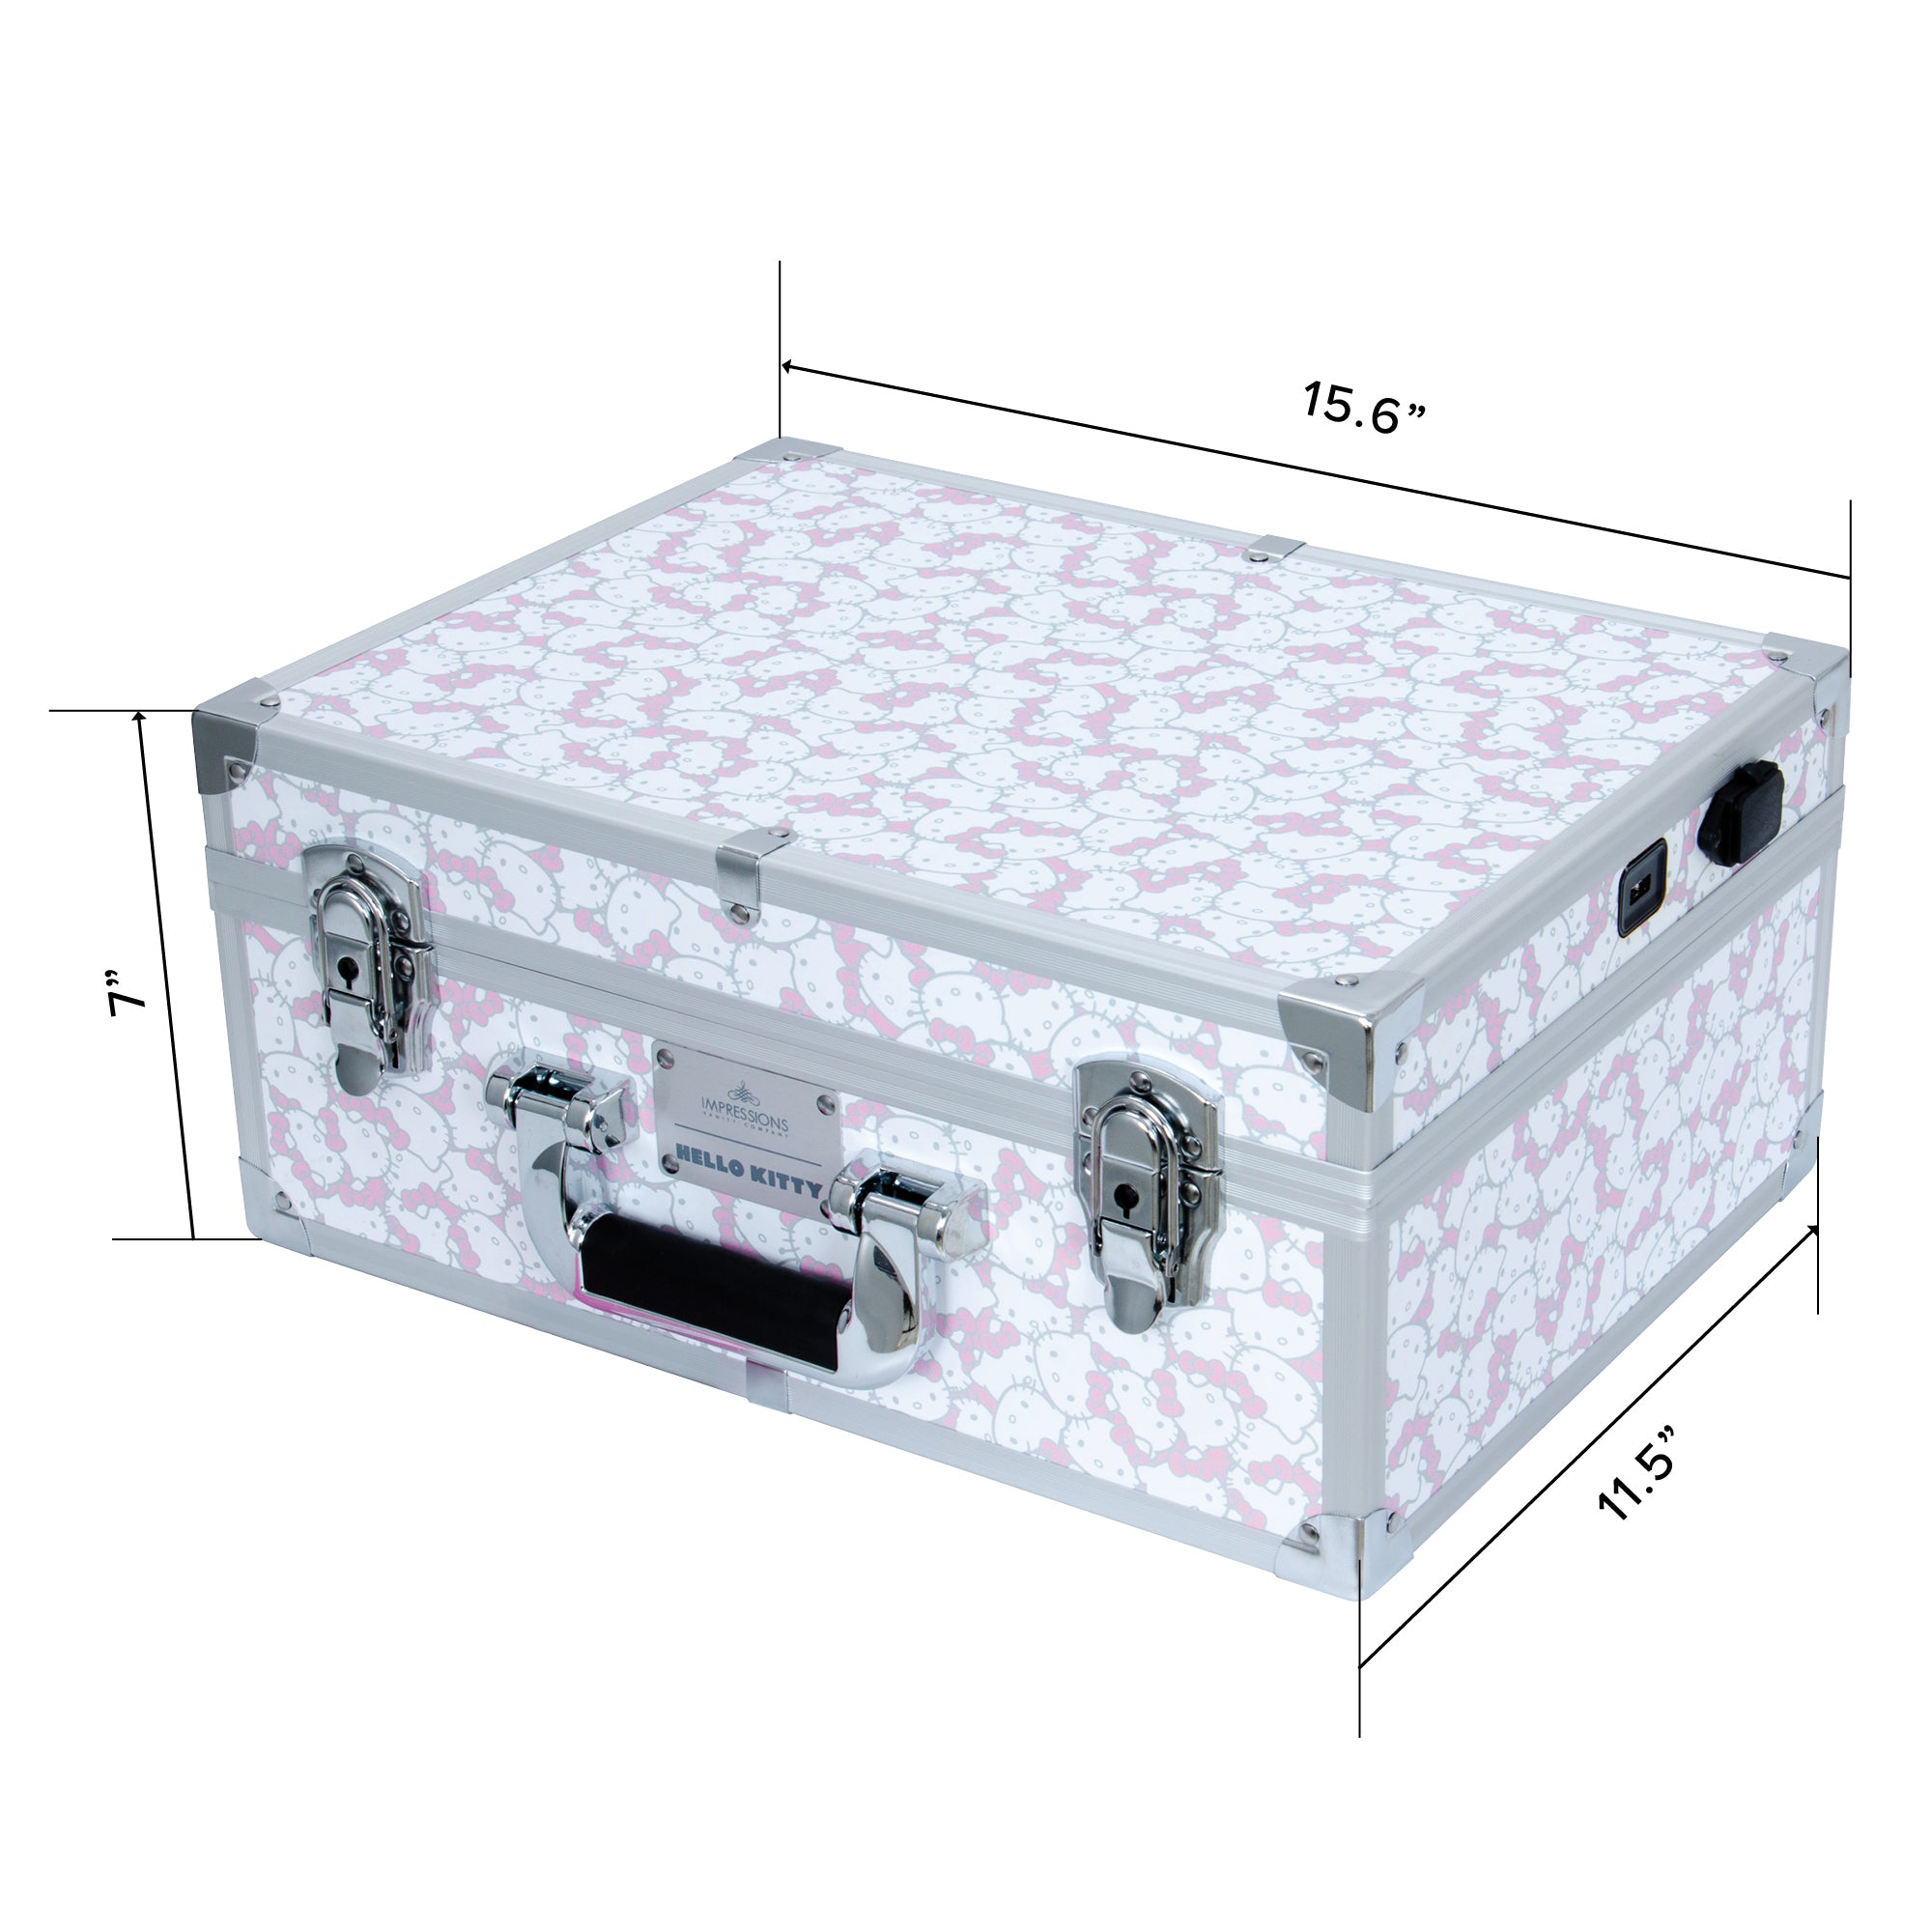 Impressions Vanity Hello Kitty Slaycube Makeup Travel Case with Durable Outer, Makeup Organizer Case in Portable Size with 2 Extendable Trays and Flip